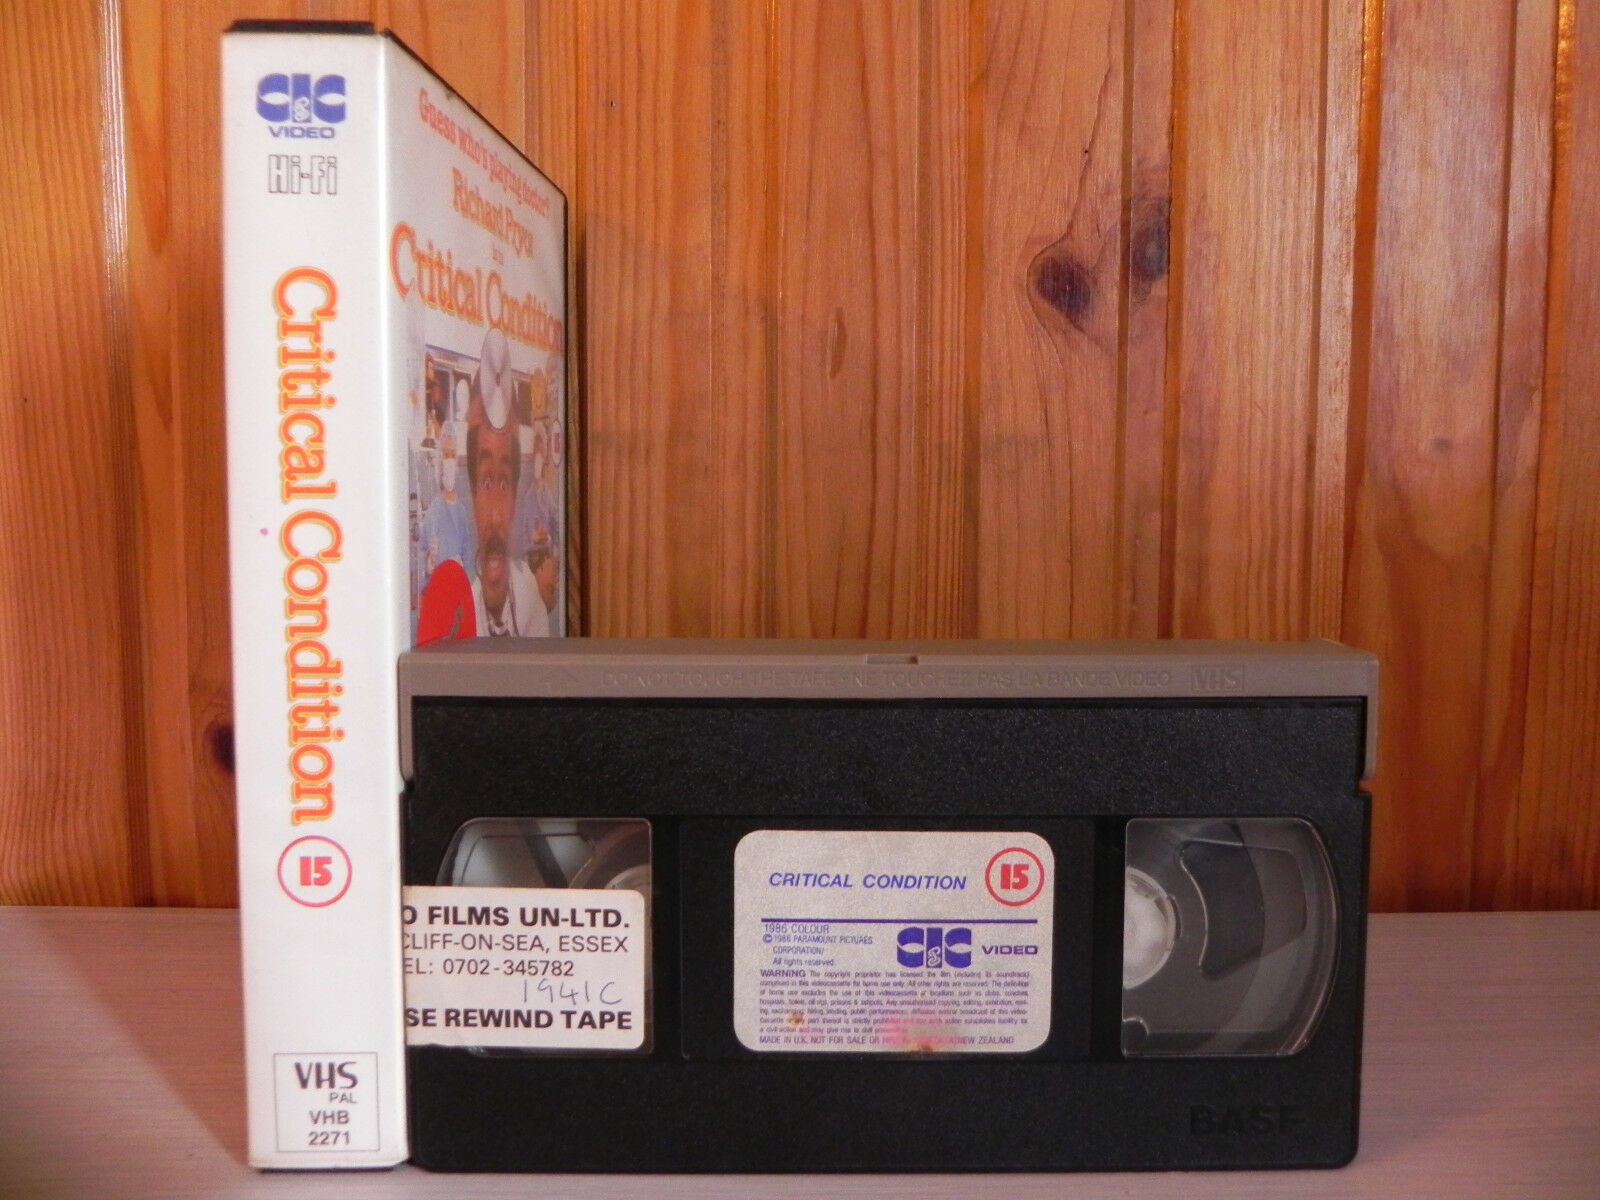 Critical Condition - The Accidental Doctor - Comedy; Richard Prior [Large Box] Rental - Pal VHS-